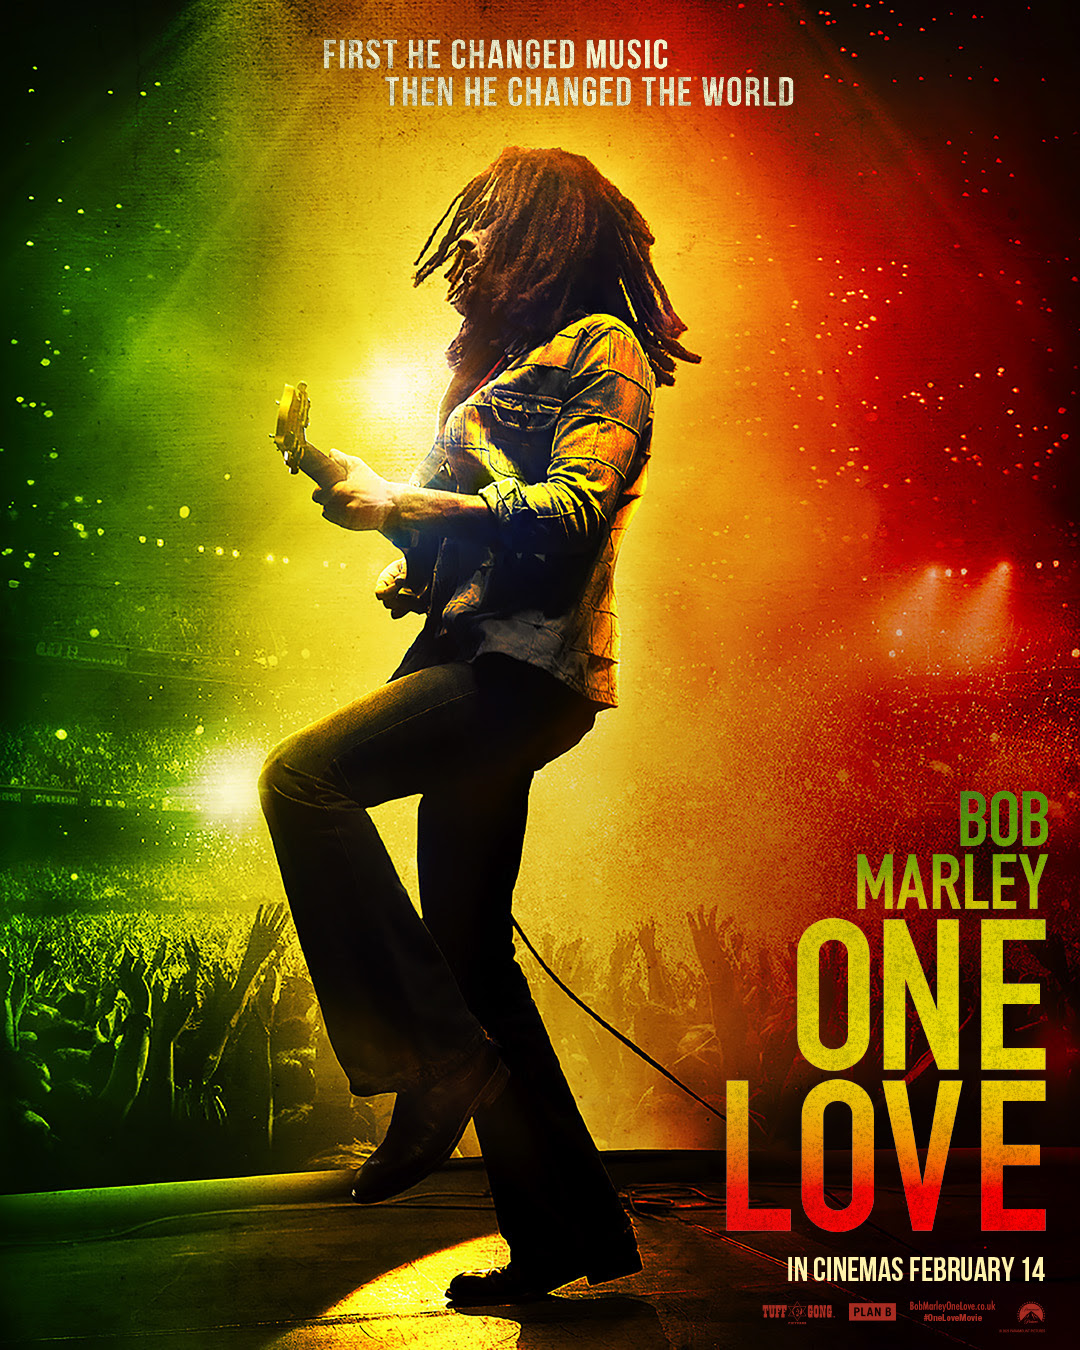 New trailer and poster for upcoming Bob Marley biopic released